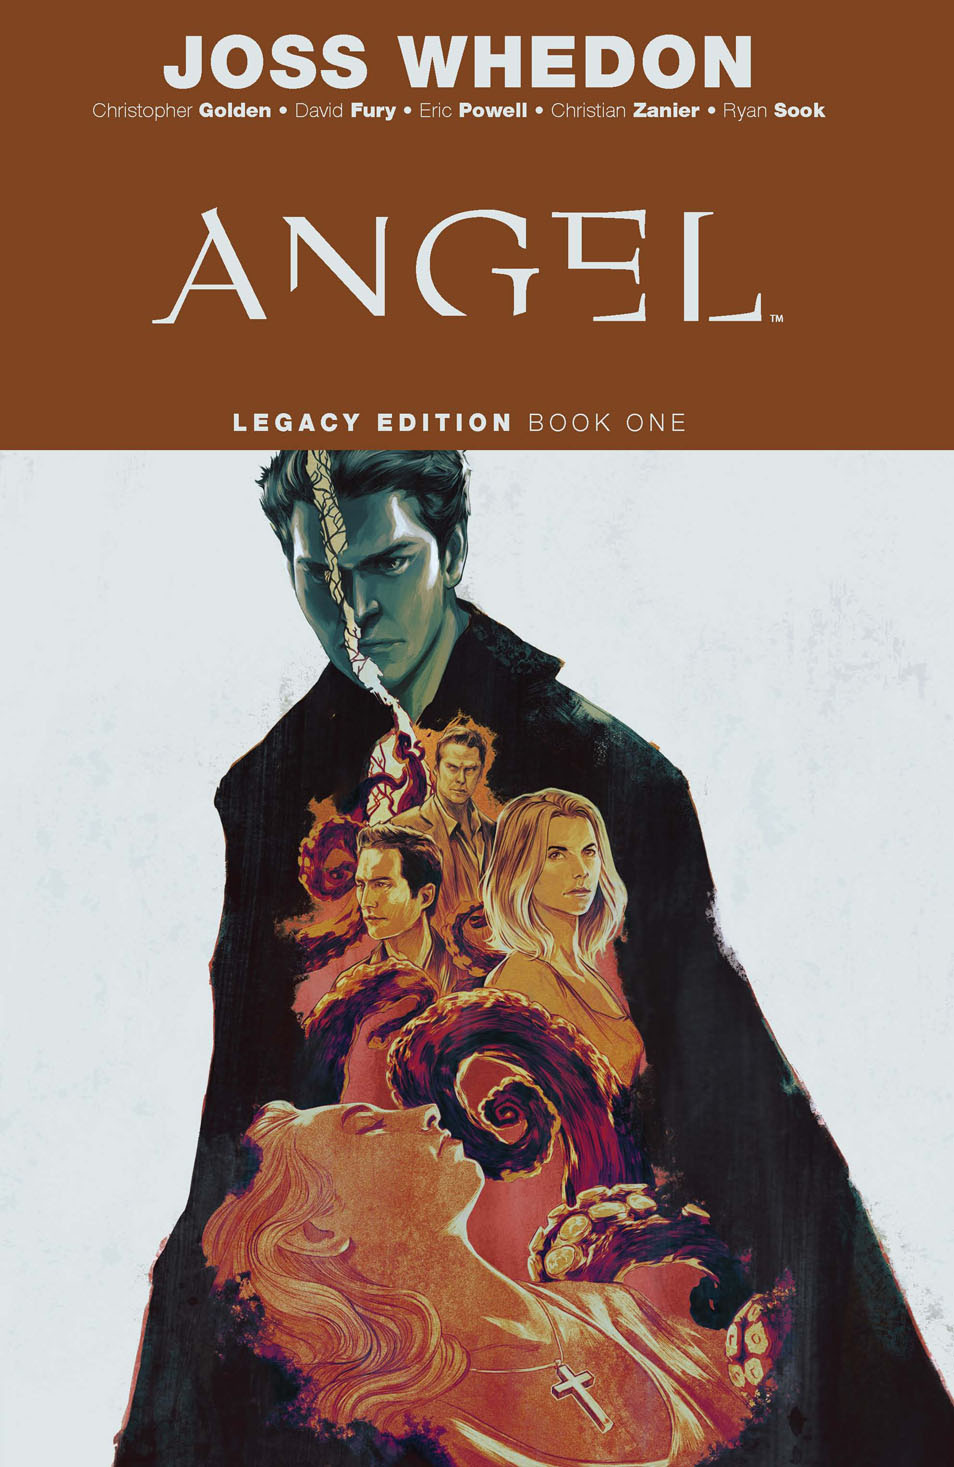 This image is the cover for the book Angel Legacy Edition Book One, Angel